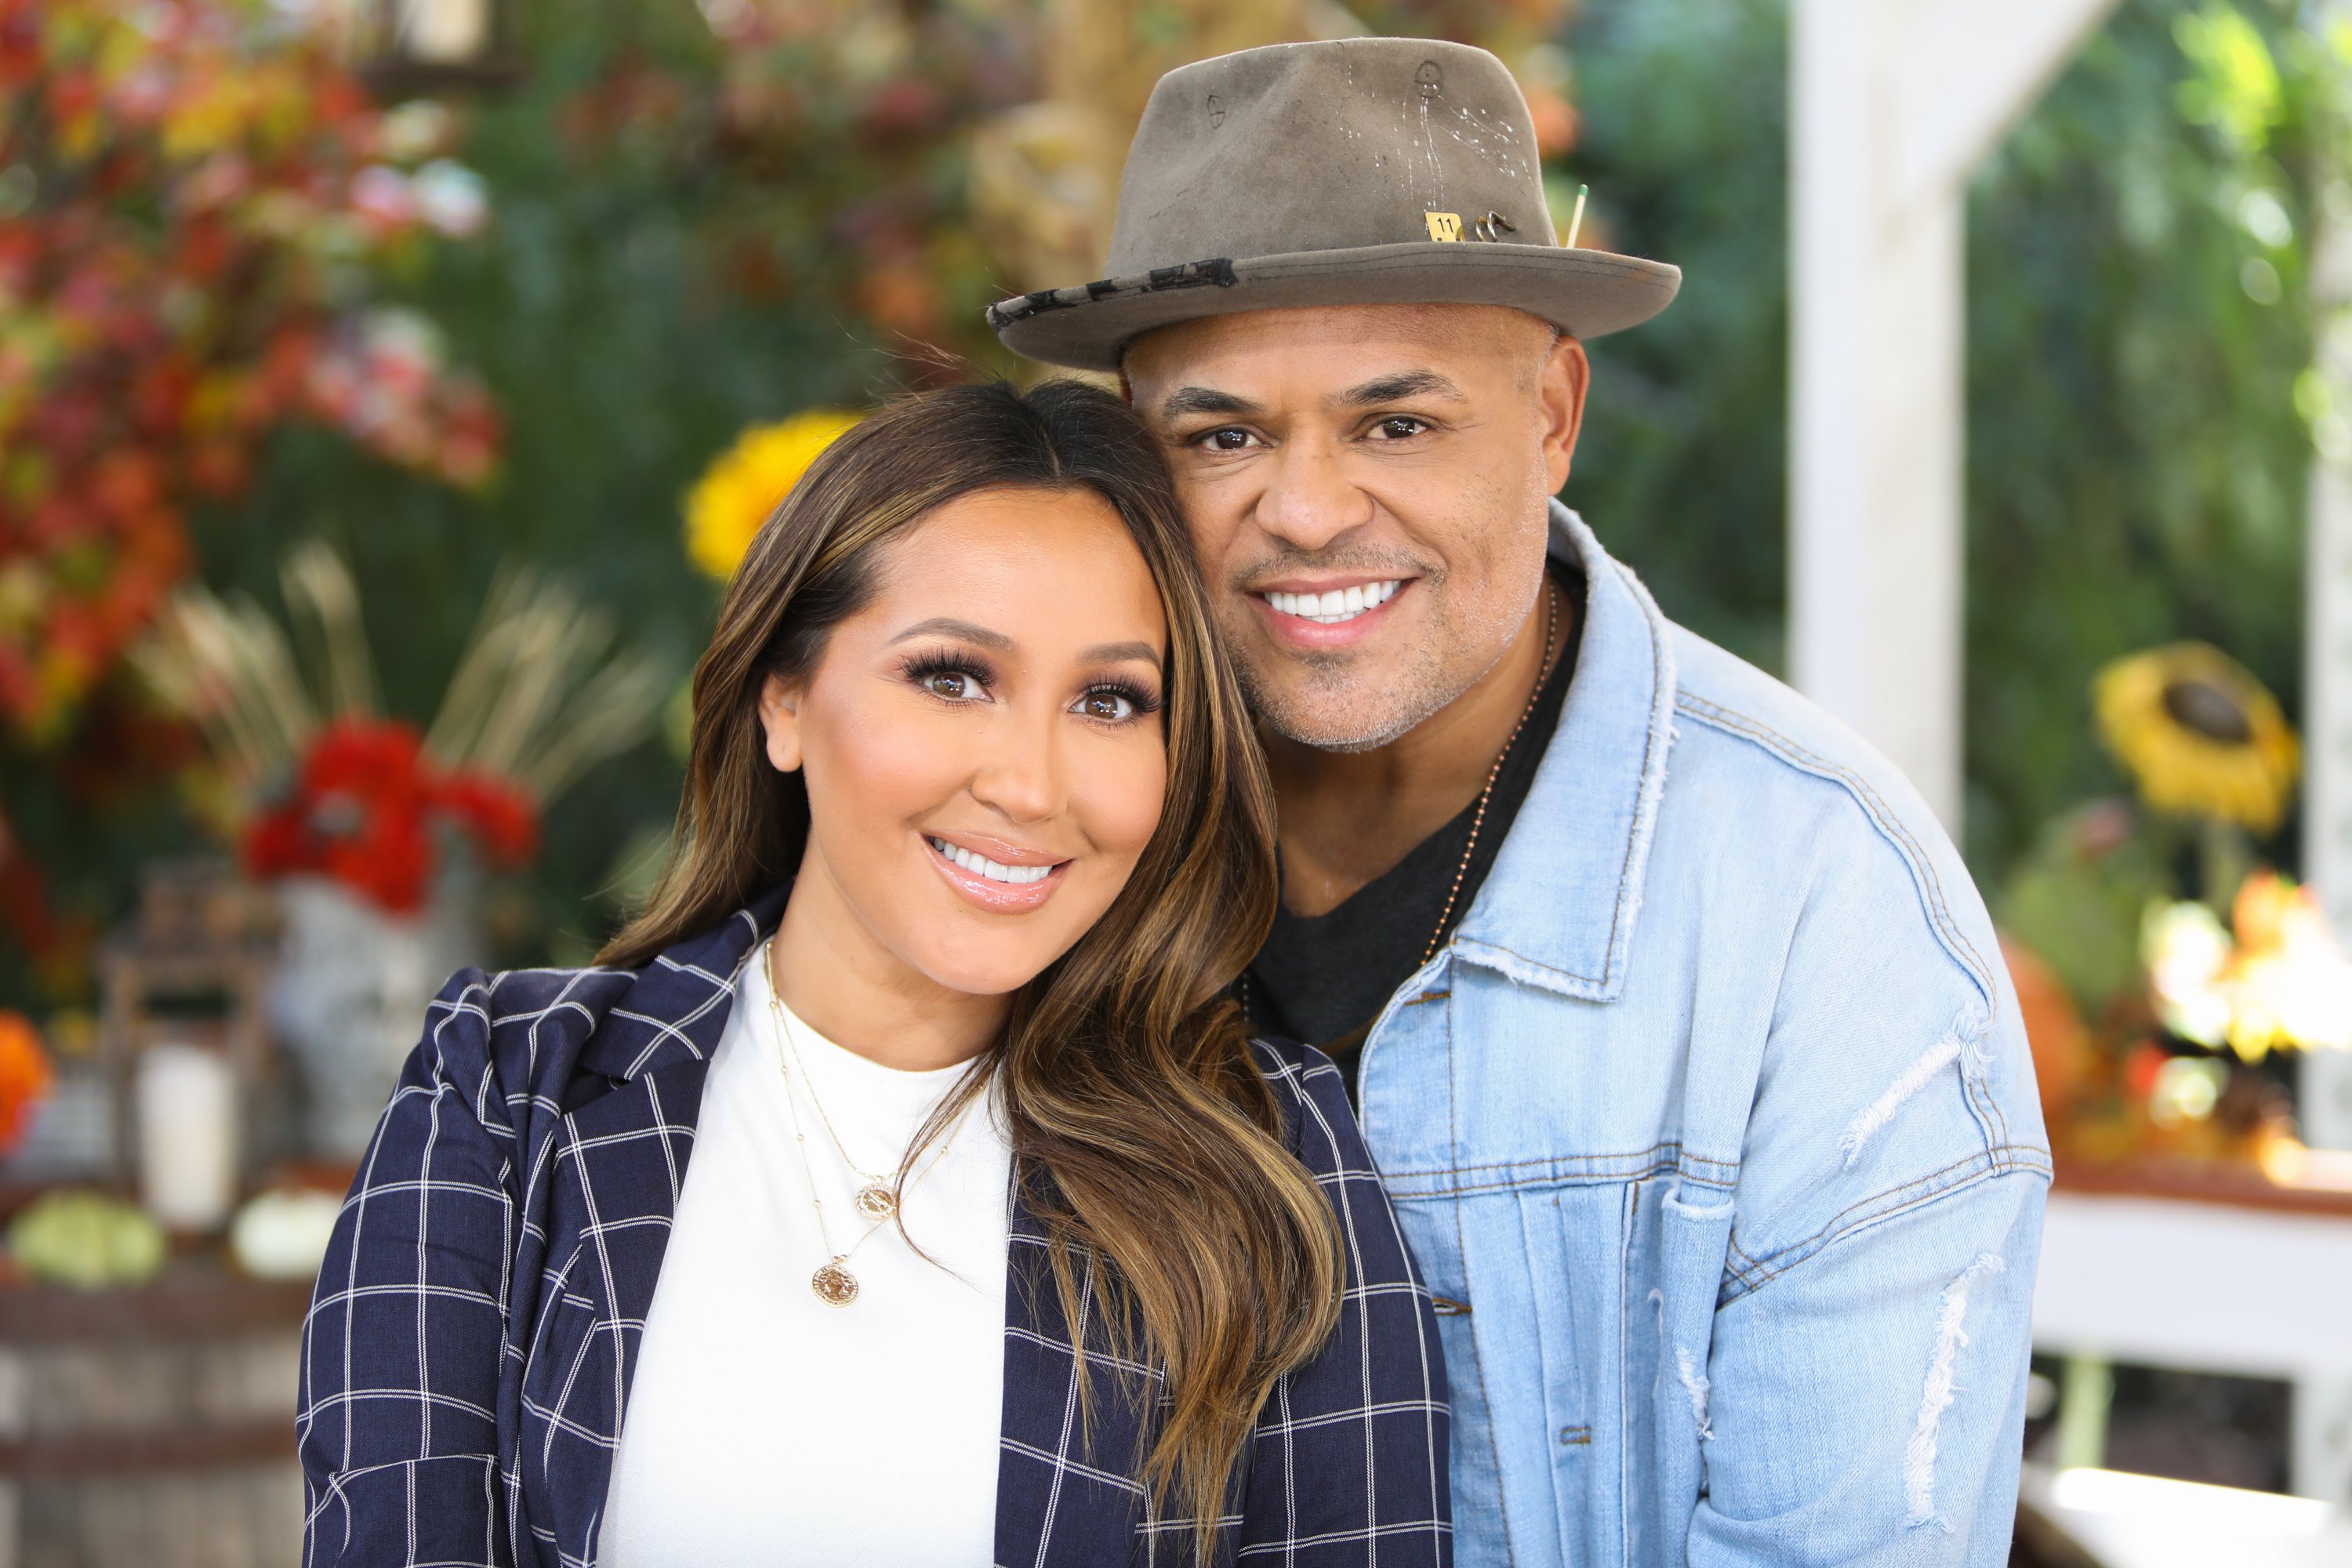 Adrienne Houghton and Israel Houghton  visit Hallmark's "Home & Family" at Universal Studios Hollywood on October 5, 2018  | Photo: GettyImages